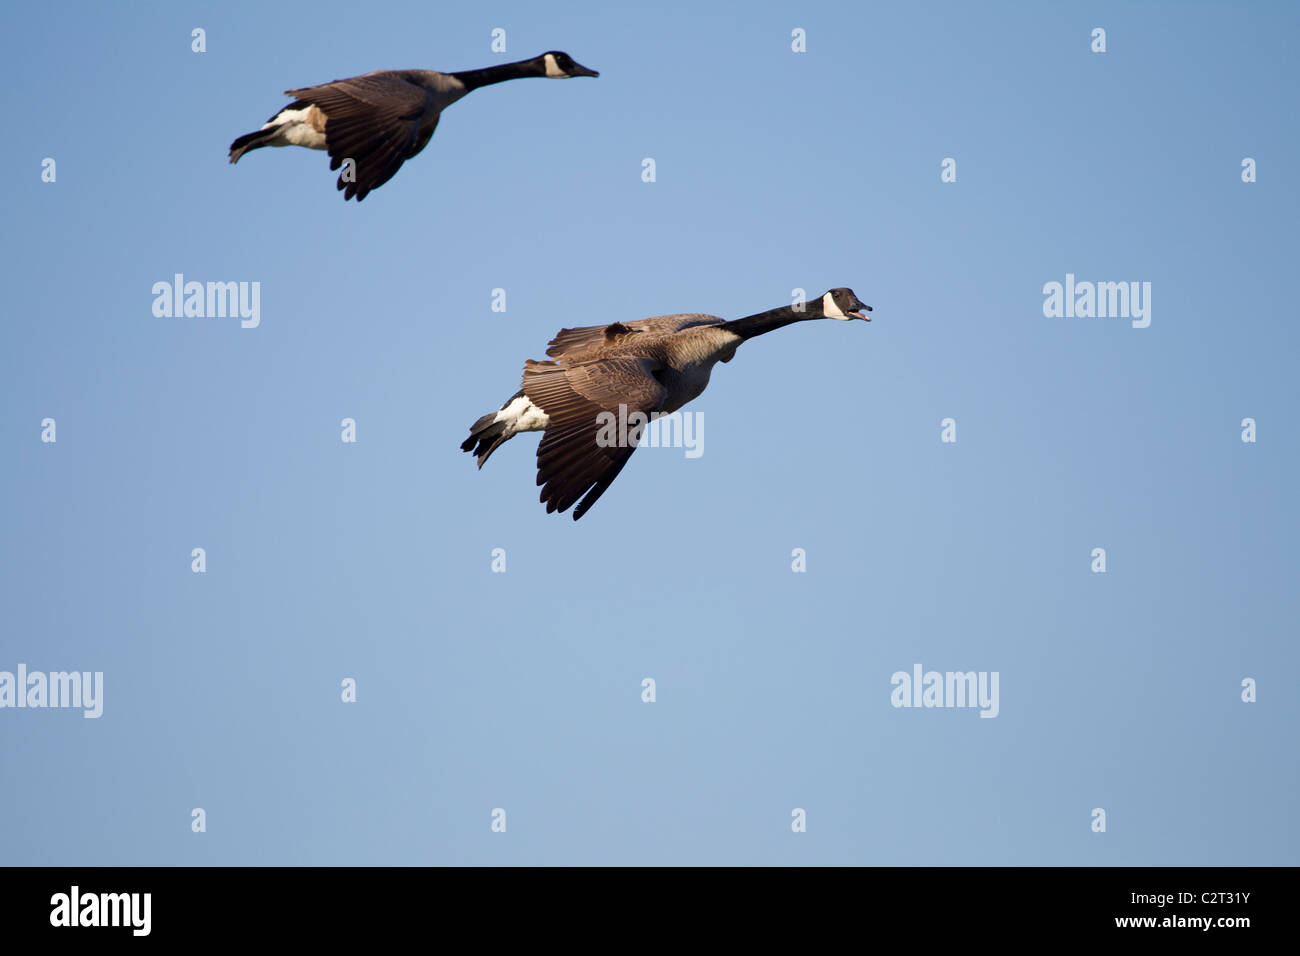 Two Canada geese in crossing flight with wings set for descent. Stock Photo